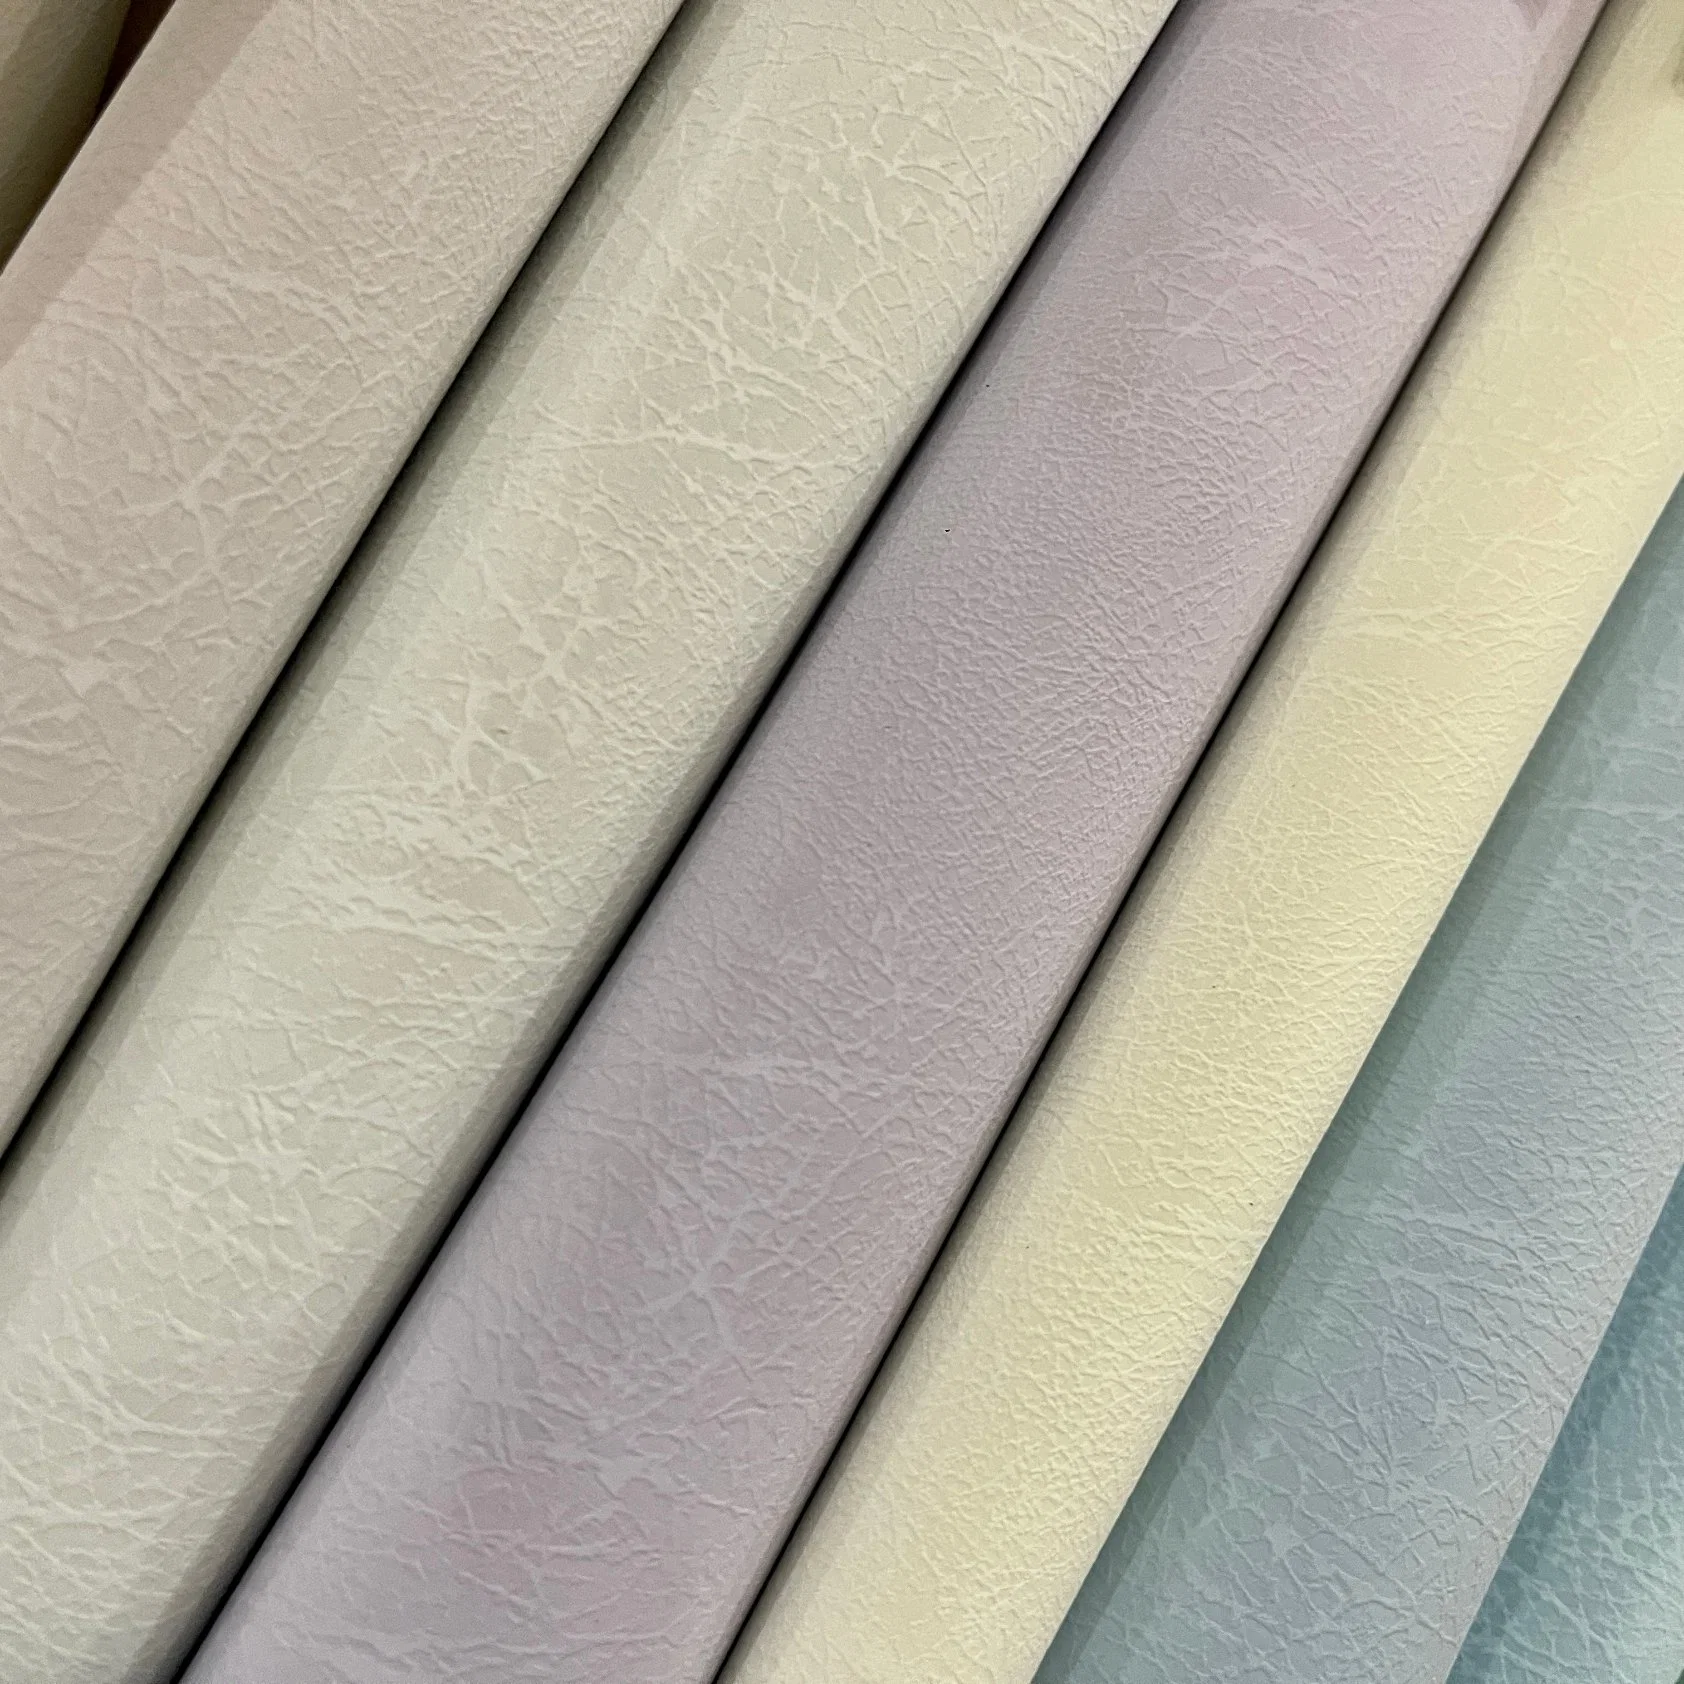 Wholesale High Quality Faux Leather Fabric Microfiber Leather